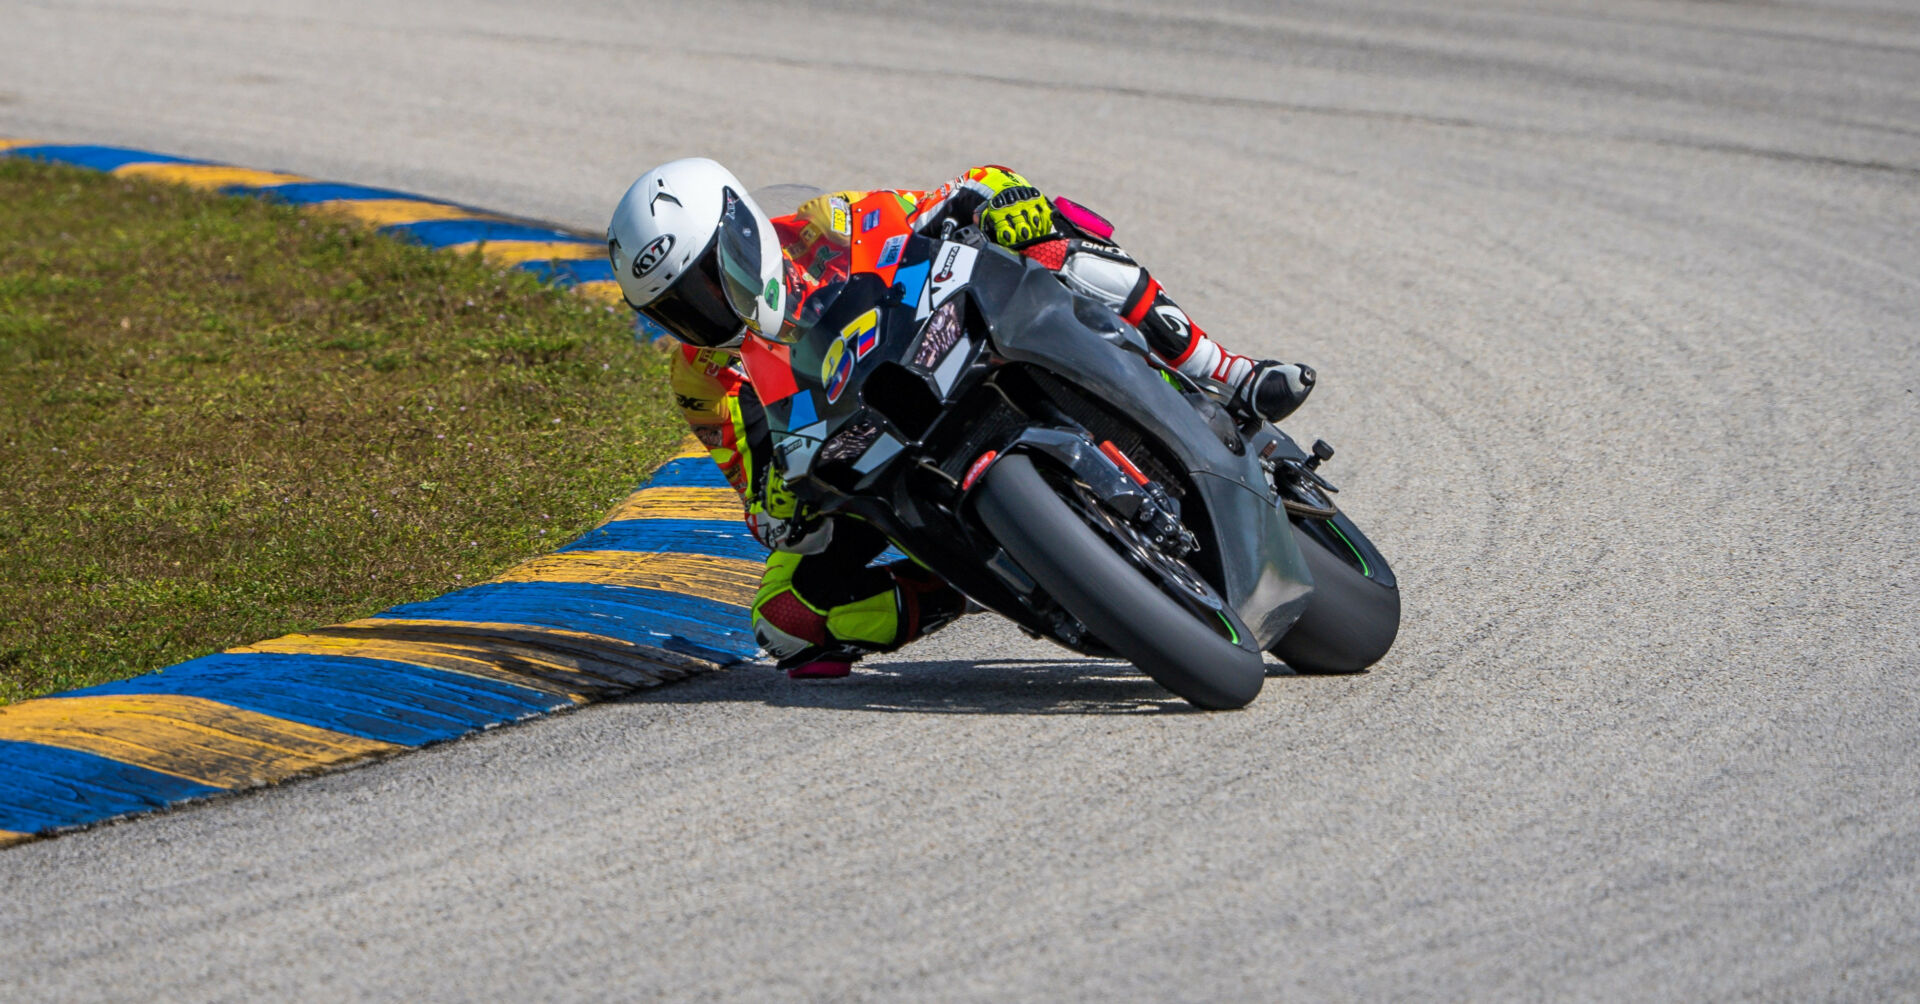 Stefano Mesa (37). Photo by Phenry Photography, courtesy PanAmerican Superbike.